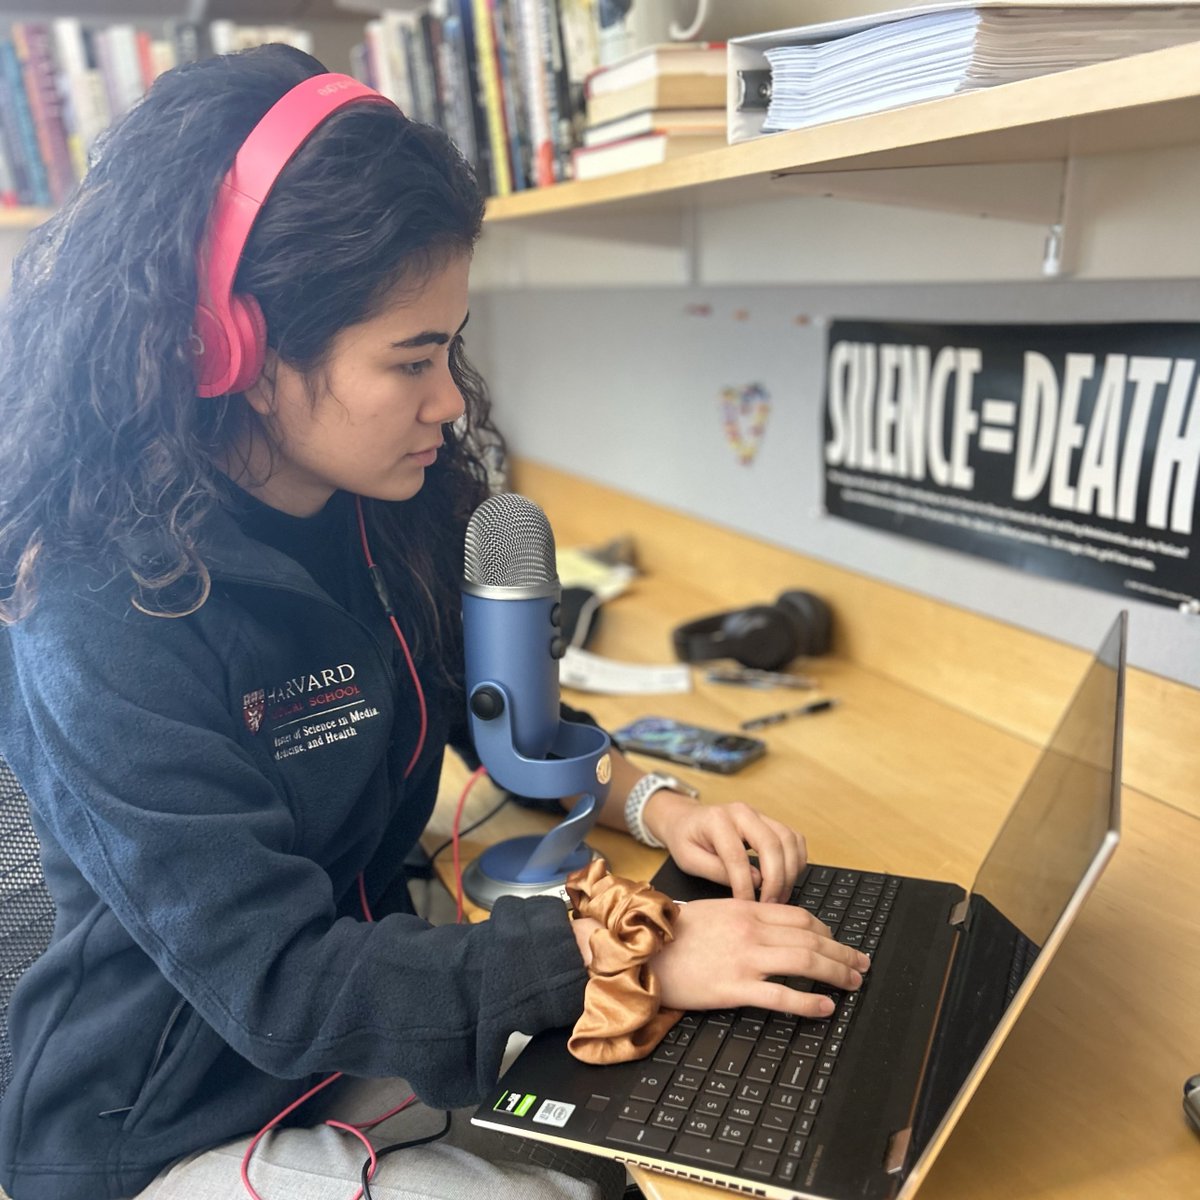 The Class of 2024 is finishing up their media projects. Nicola has been studying podcasting as part of her capstone. Come learn more about their work, and the rest of the cohort’s work, at the MMH Class of 2024 Capstone presentations, May 14th and 15th! bit.ly/mmh2024capstone